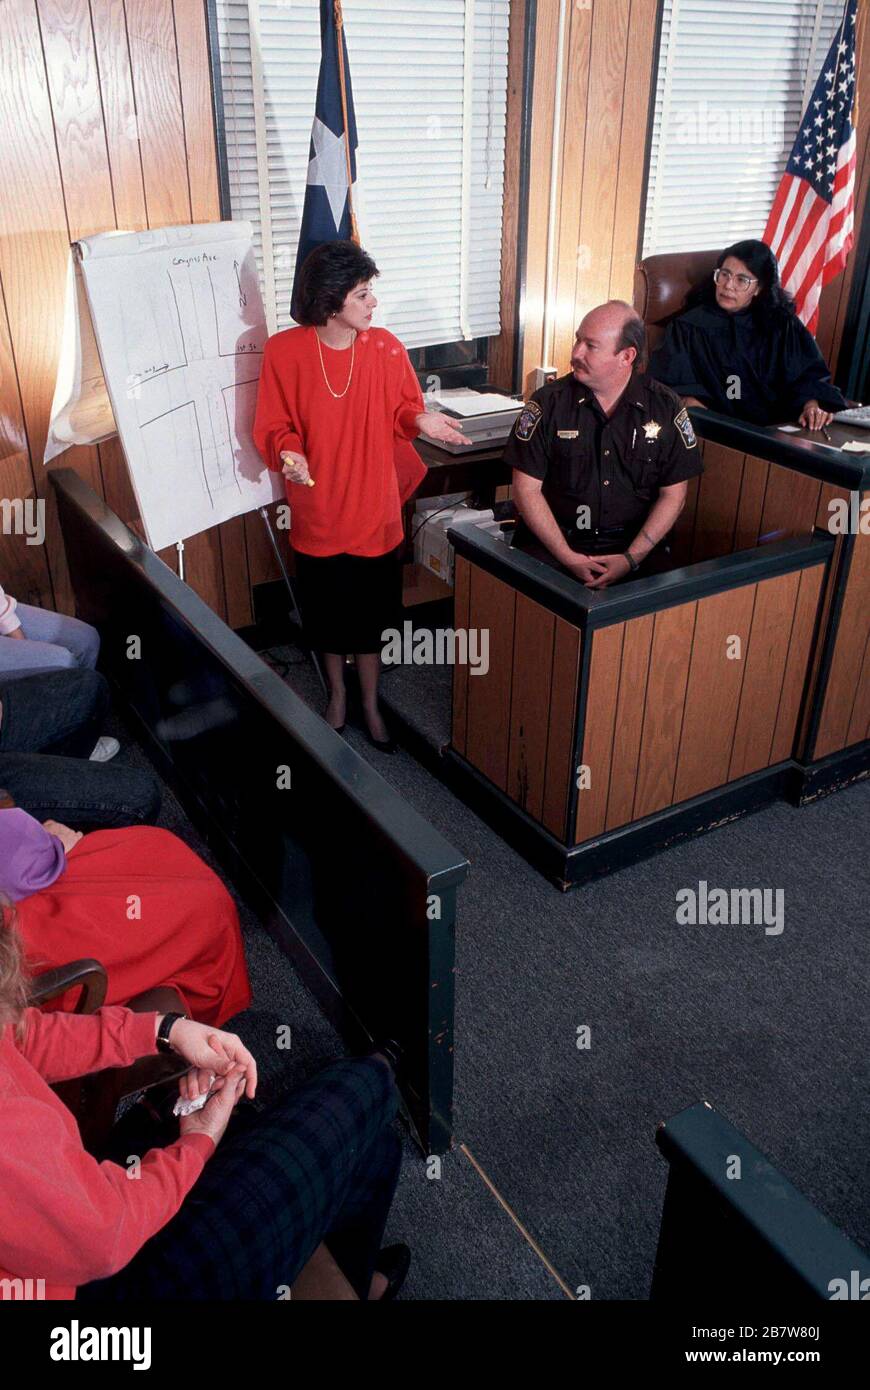 Austin Texas USA: Hispanic female judge listens as female lawyer questions county sheriff in courtroom. MR ©Bob Daemmrich Stock Photo